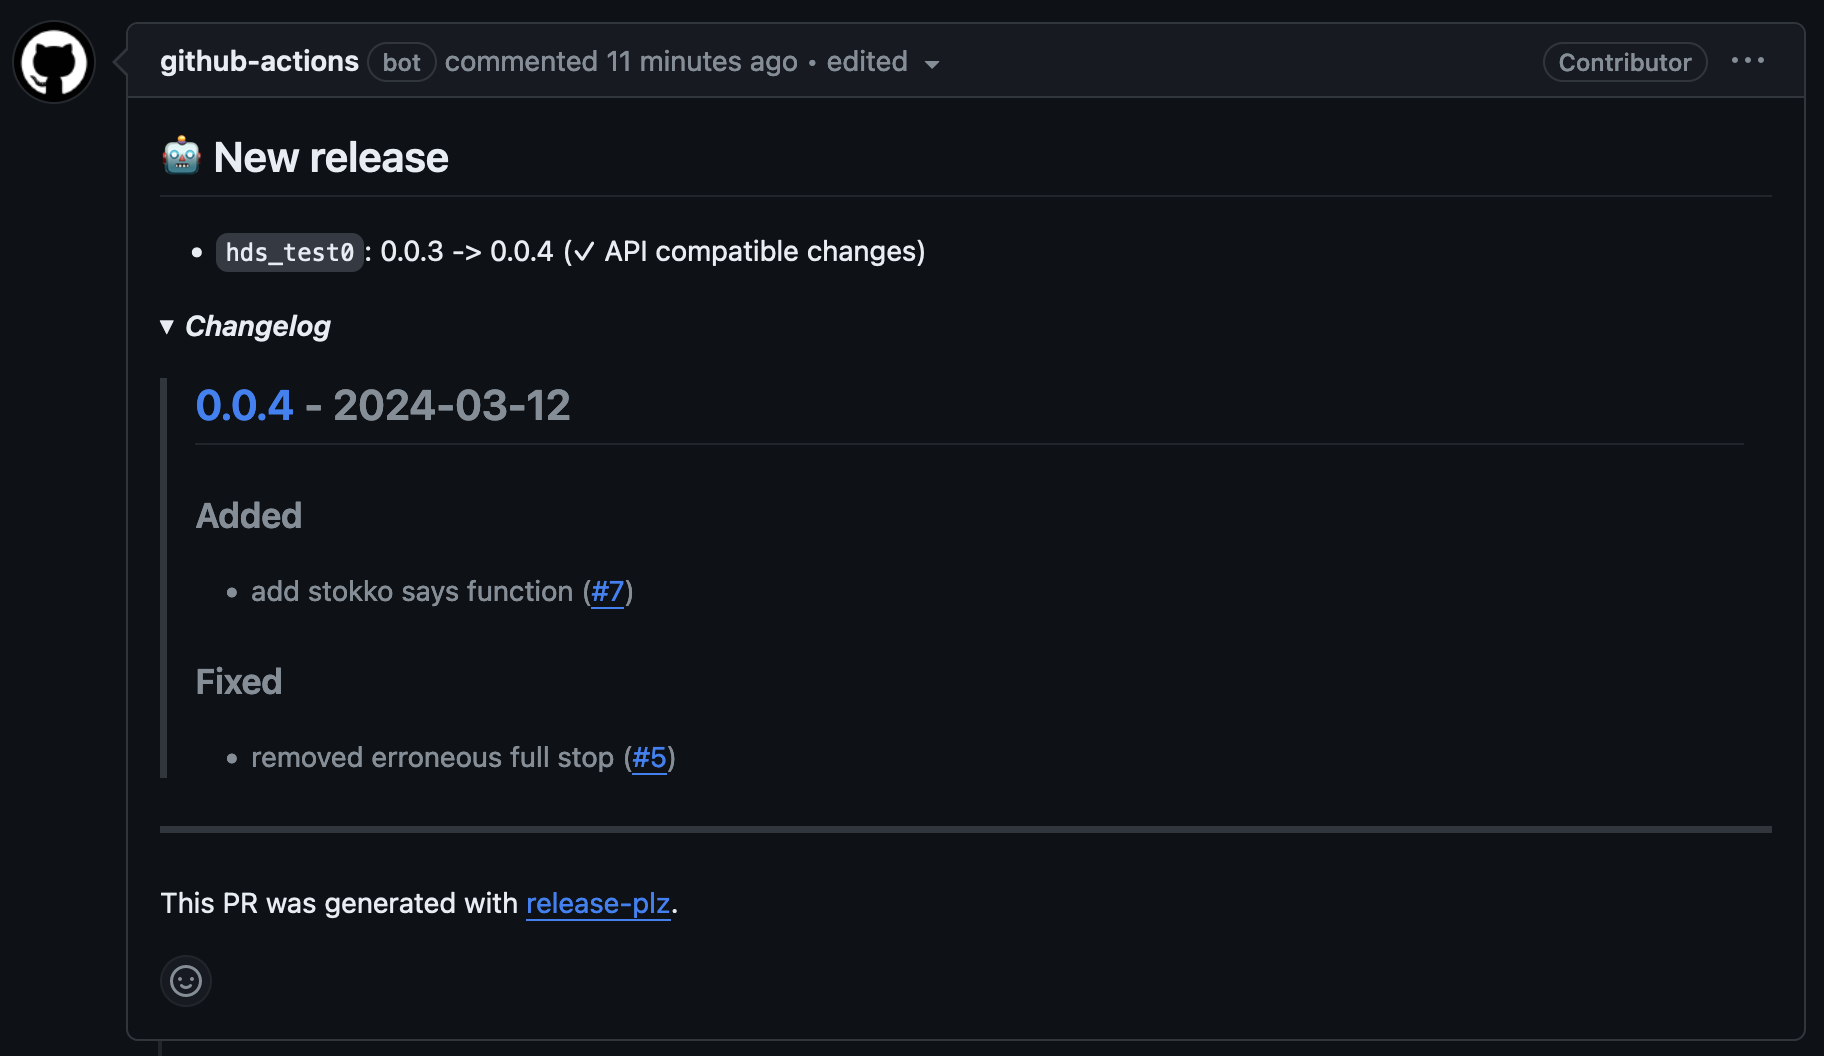 Screenshot of a GitHub Pull Request description. It specifies that the crate hds_test0 will go from version 0.0.3 to 0.0.4 and provides a list of changes of which there are 2.